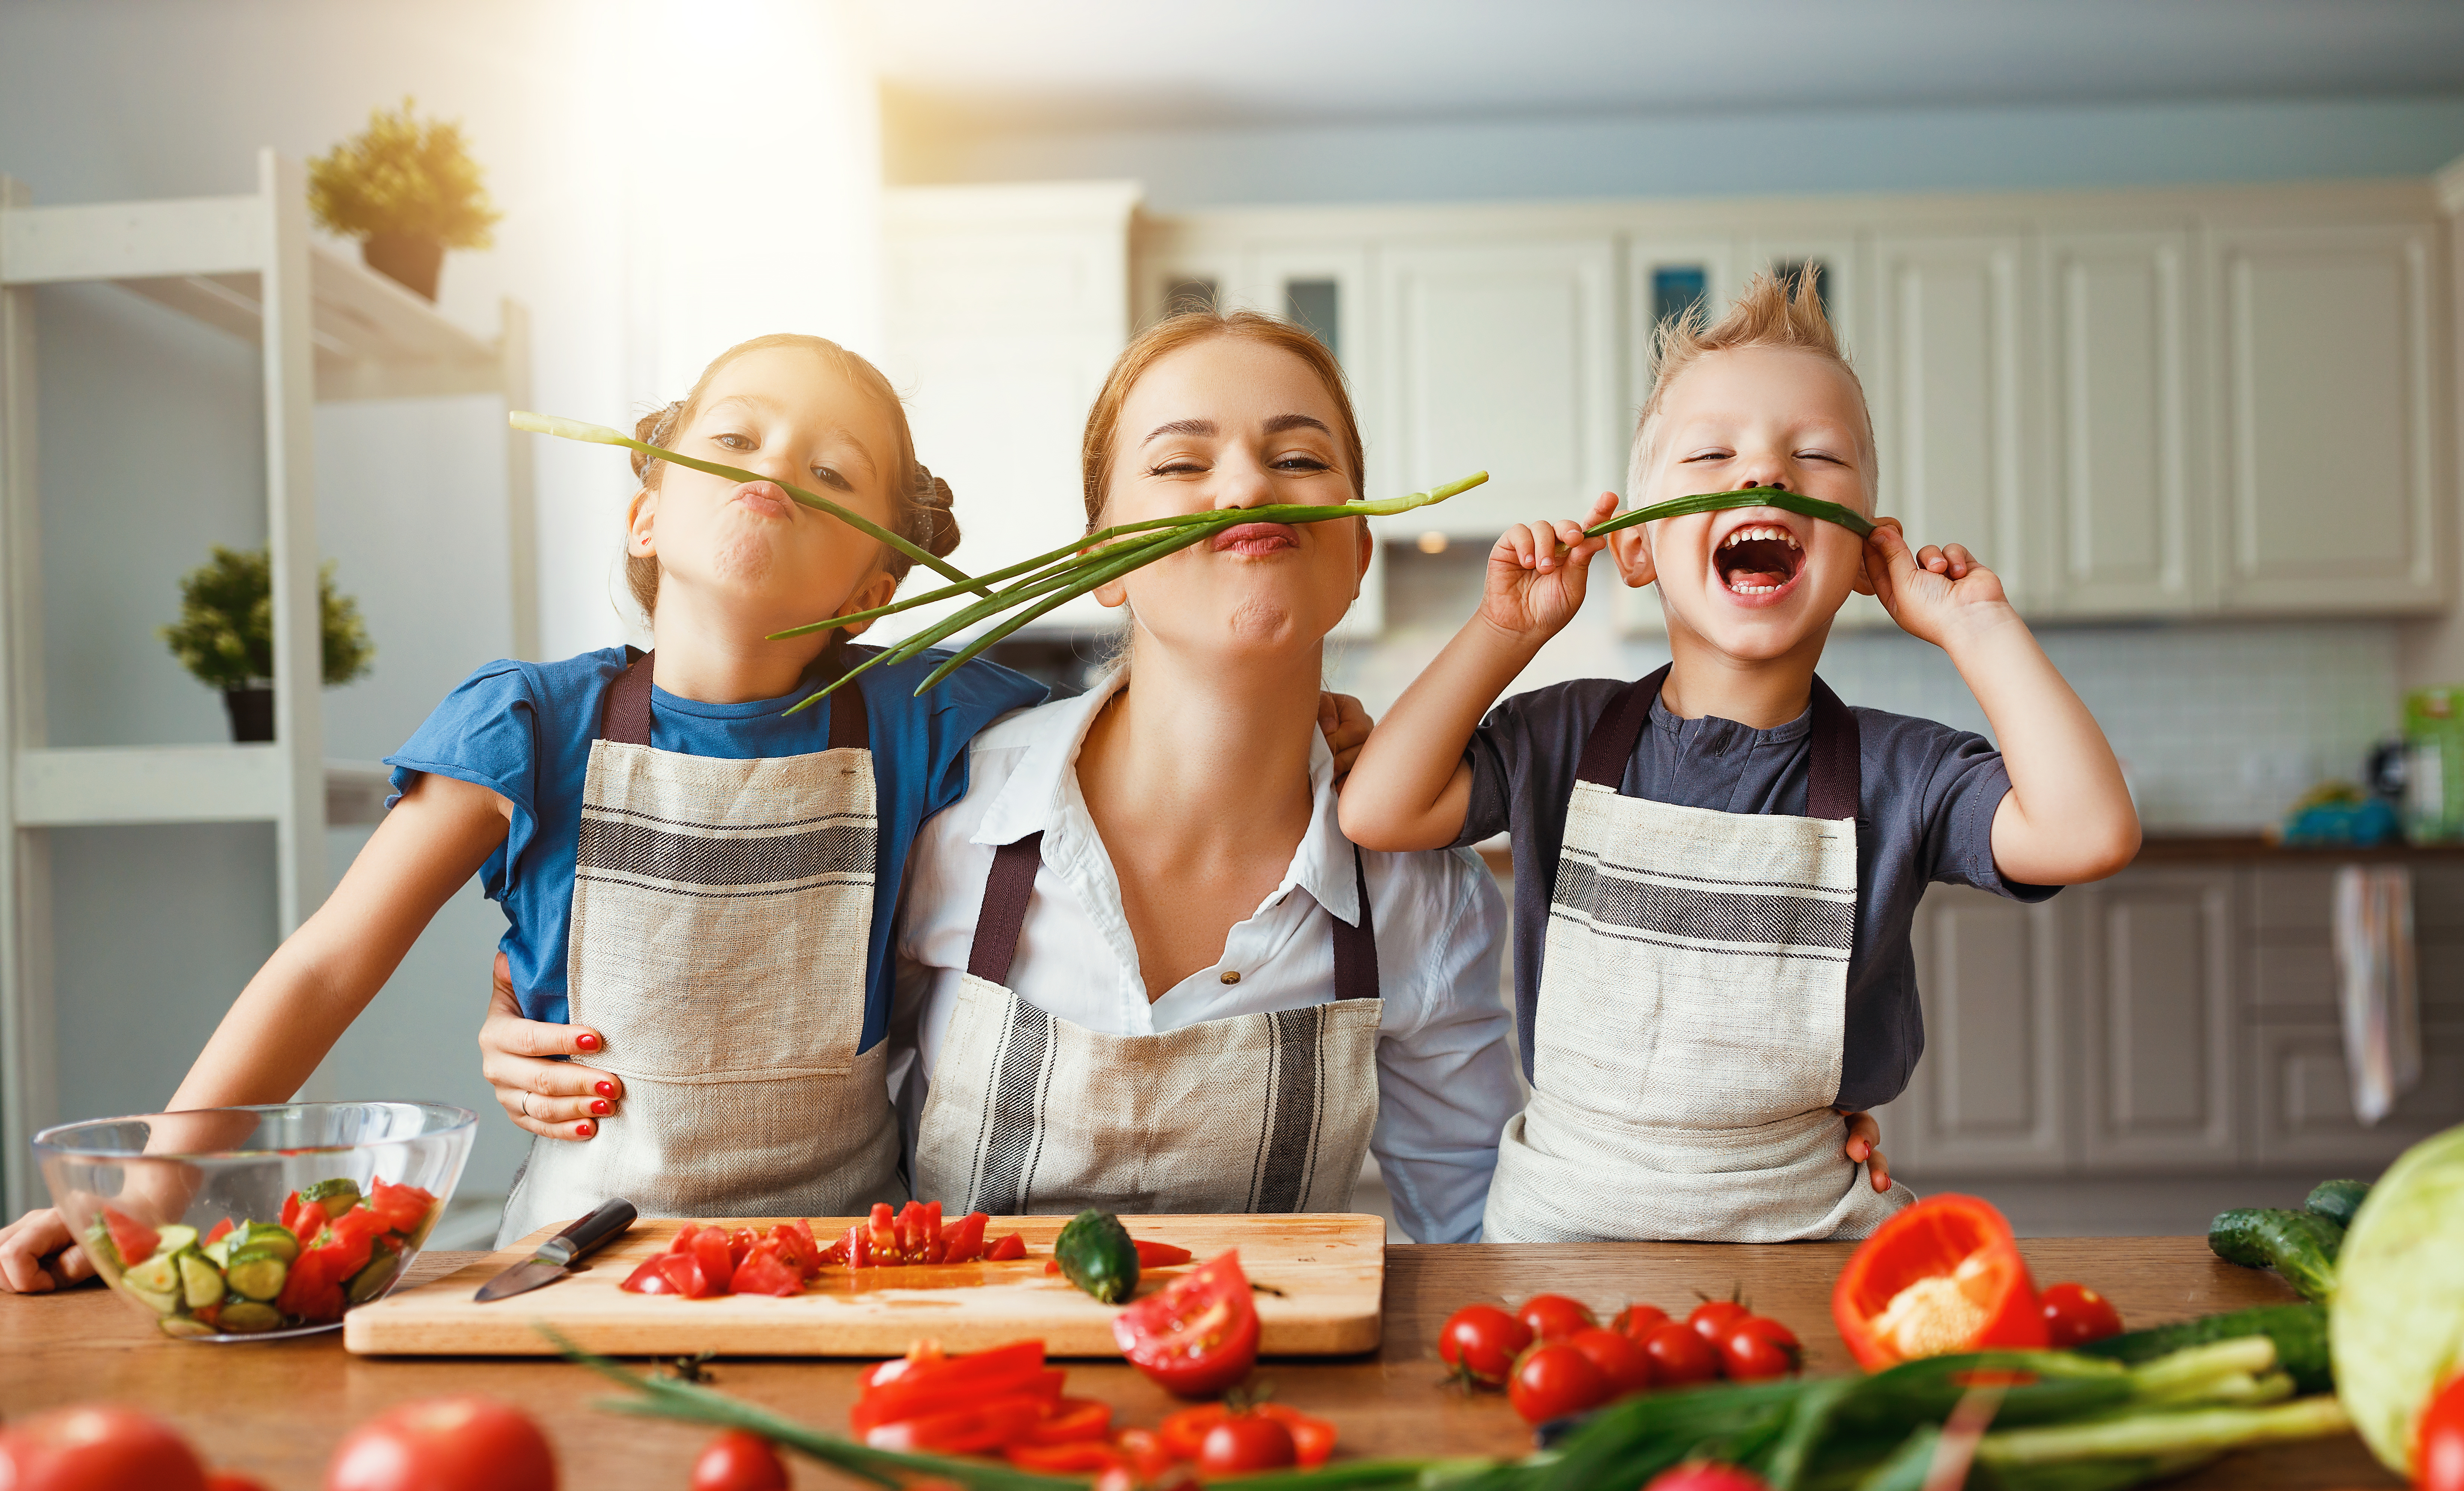 How to help children become healthy eaters -- especially vegetables?